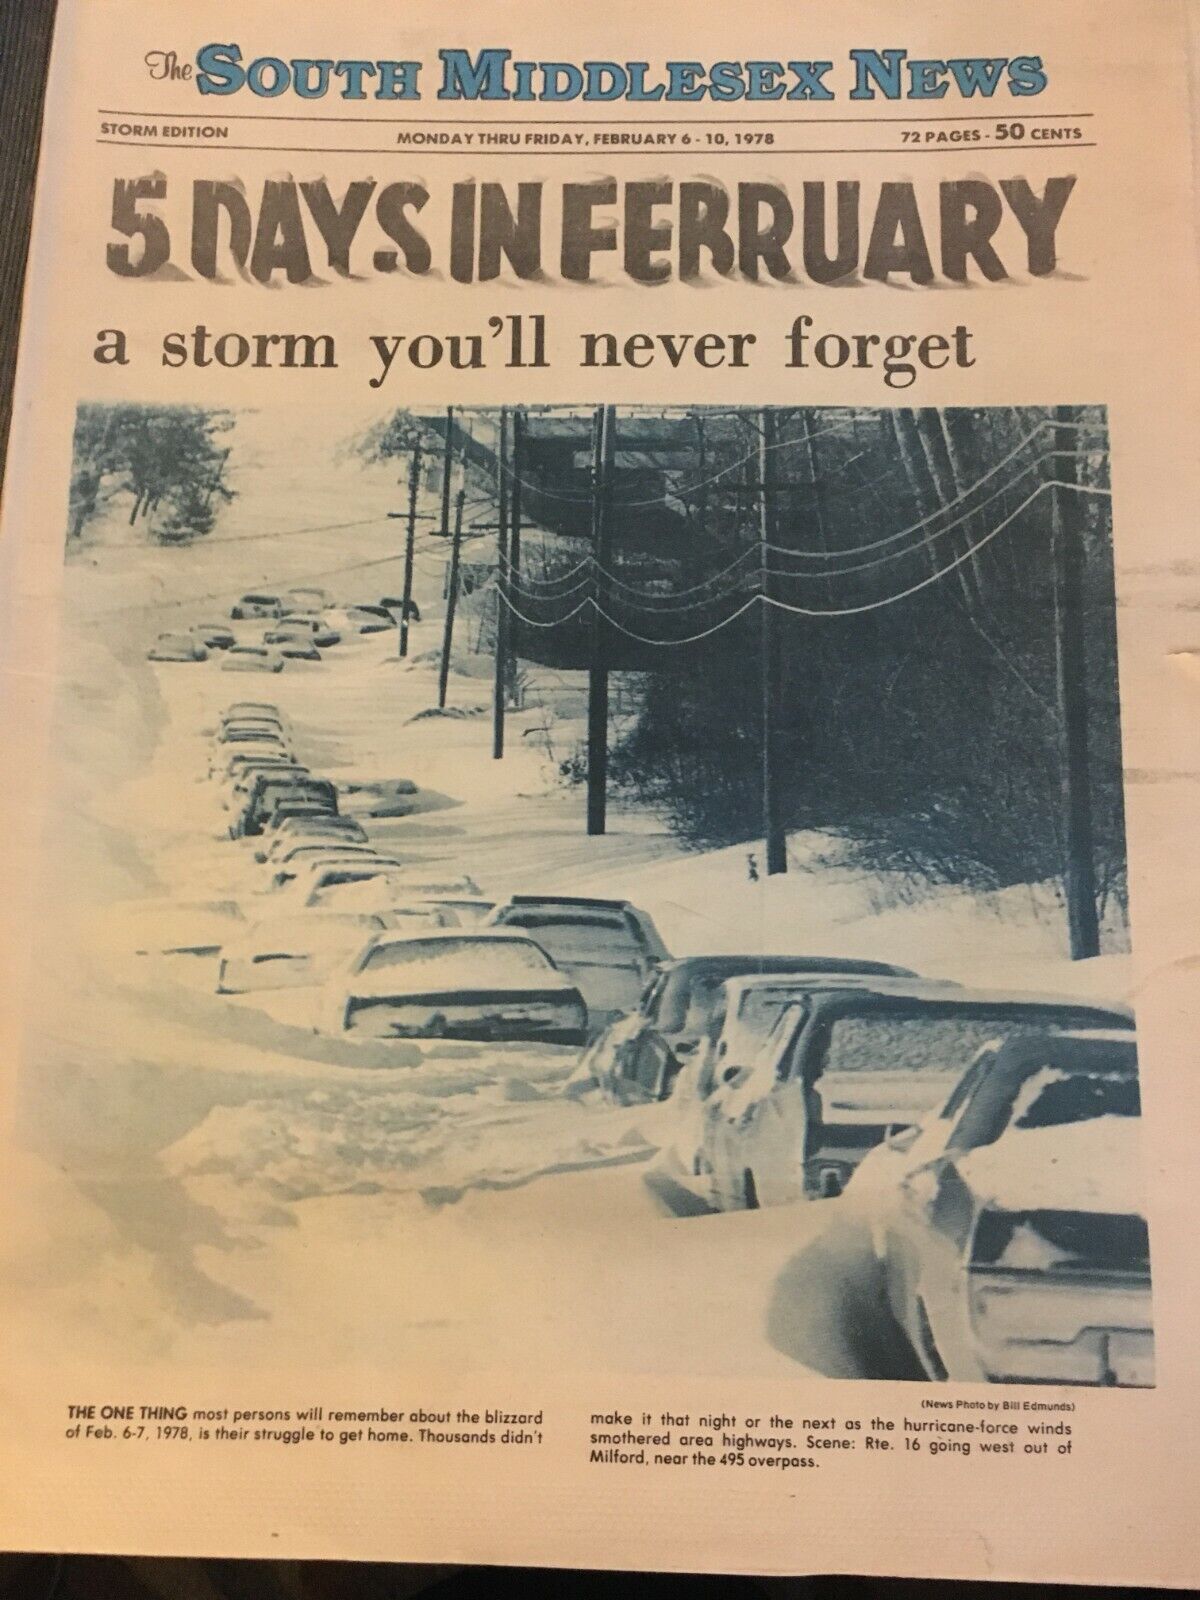 Blizzard of 1978 South Middlesex News MA newspaper supplement Feb 6-10 1978 MIT